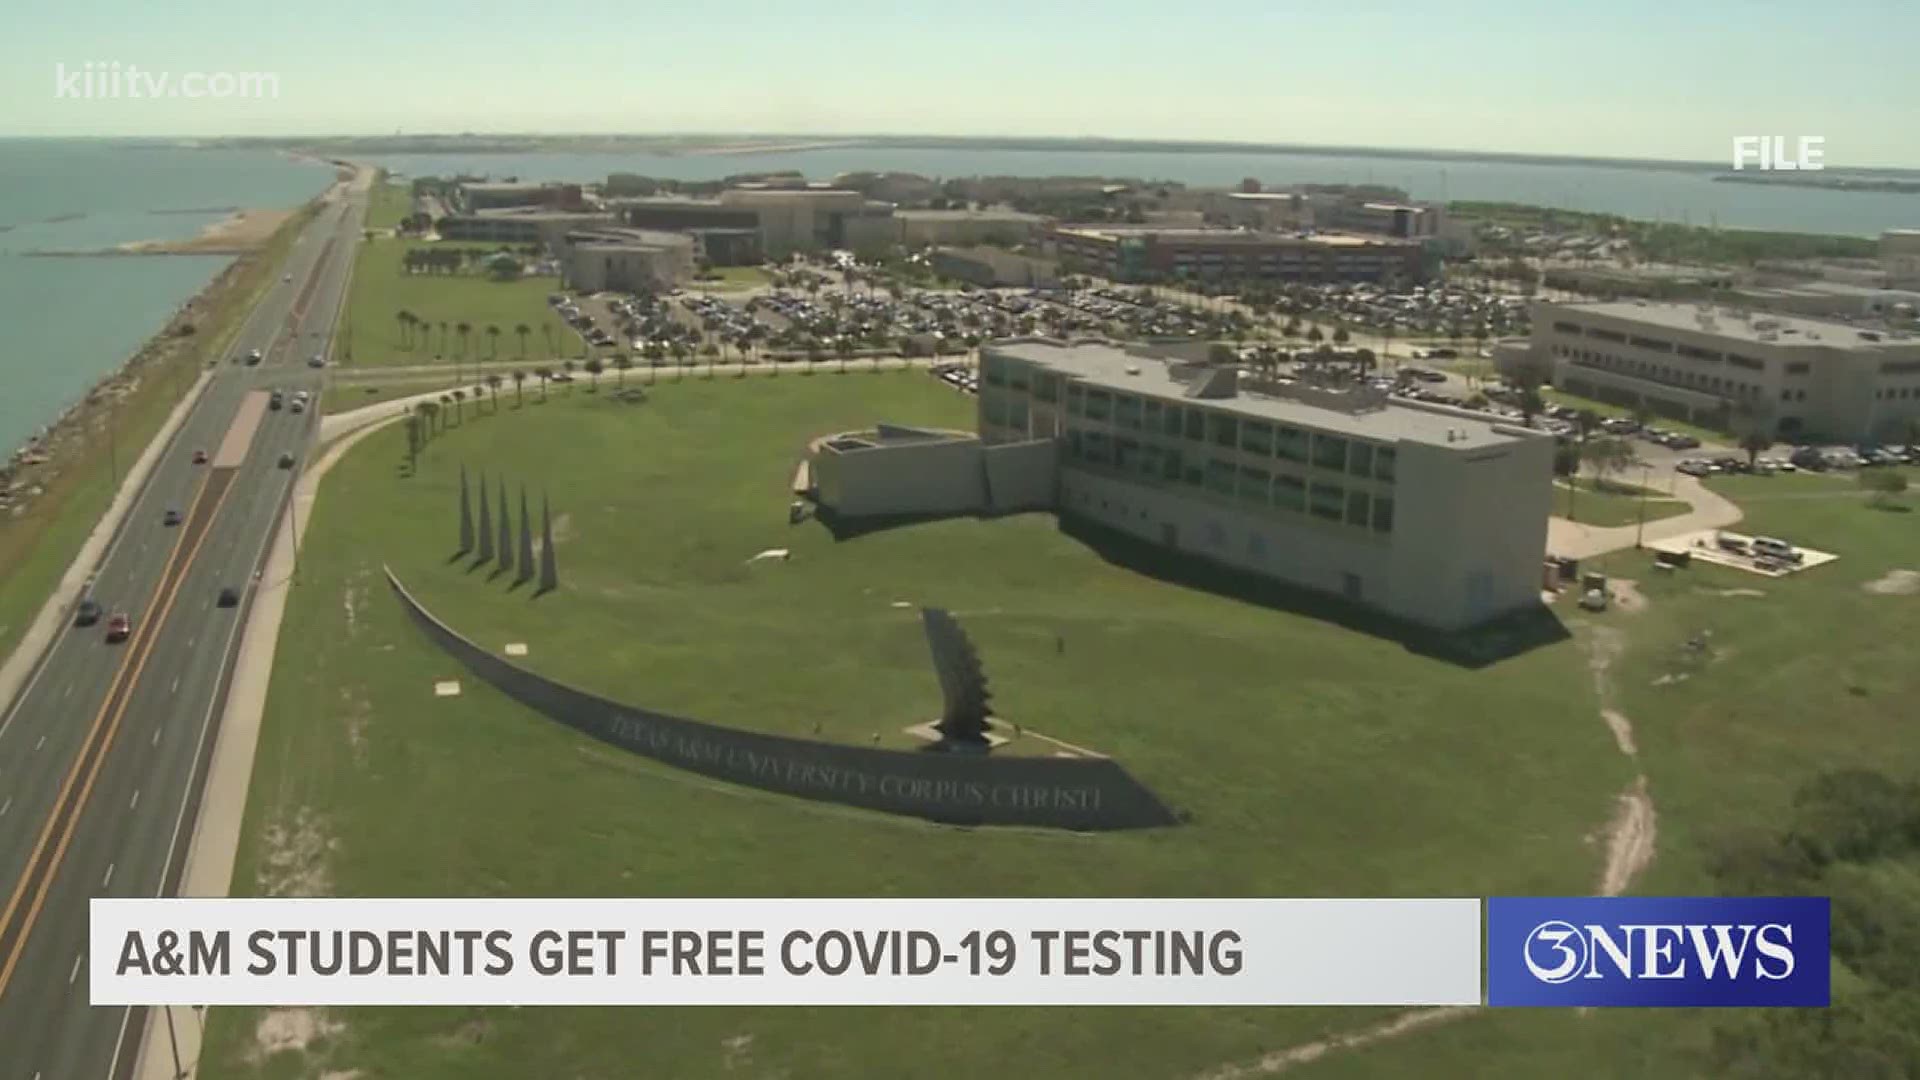 All 11 Texas A&M System universities will be providing free COVID-19 testing for students, staff and faculty.